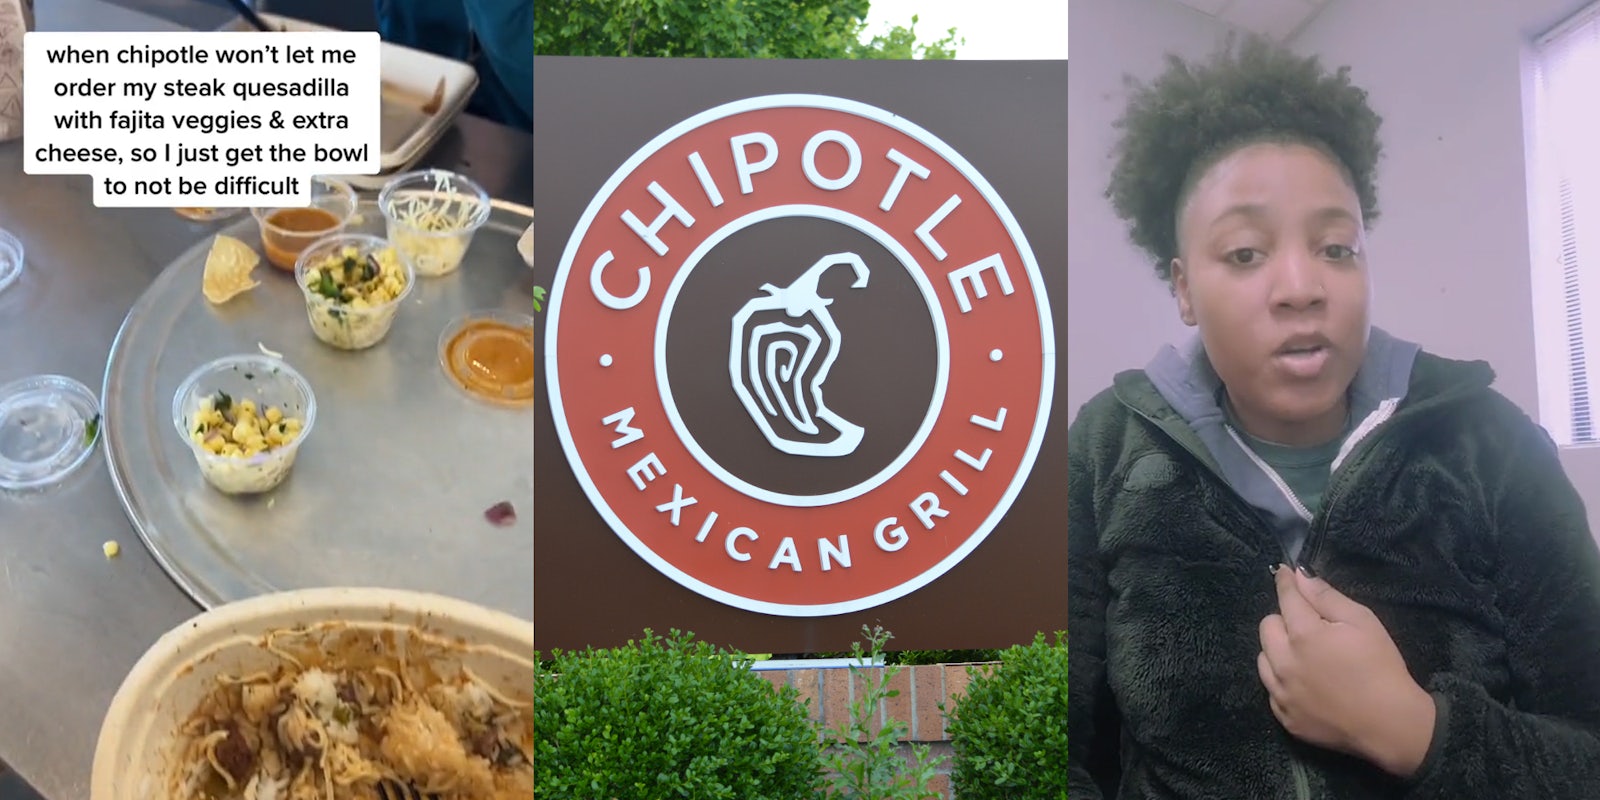 Chipotle food on table with caption 'when chipotle won't let me order my steak quesadilla with fajita veggies & extra cheese, so I just get the bowl to not be difficult' (l) Chipotle circular logo sign outside (c) Chipotle worker speaking with hand on chest (r)